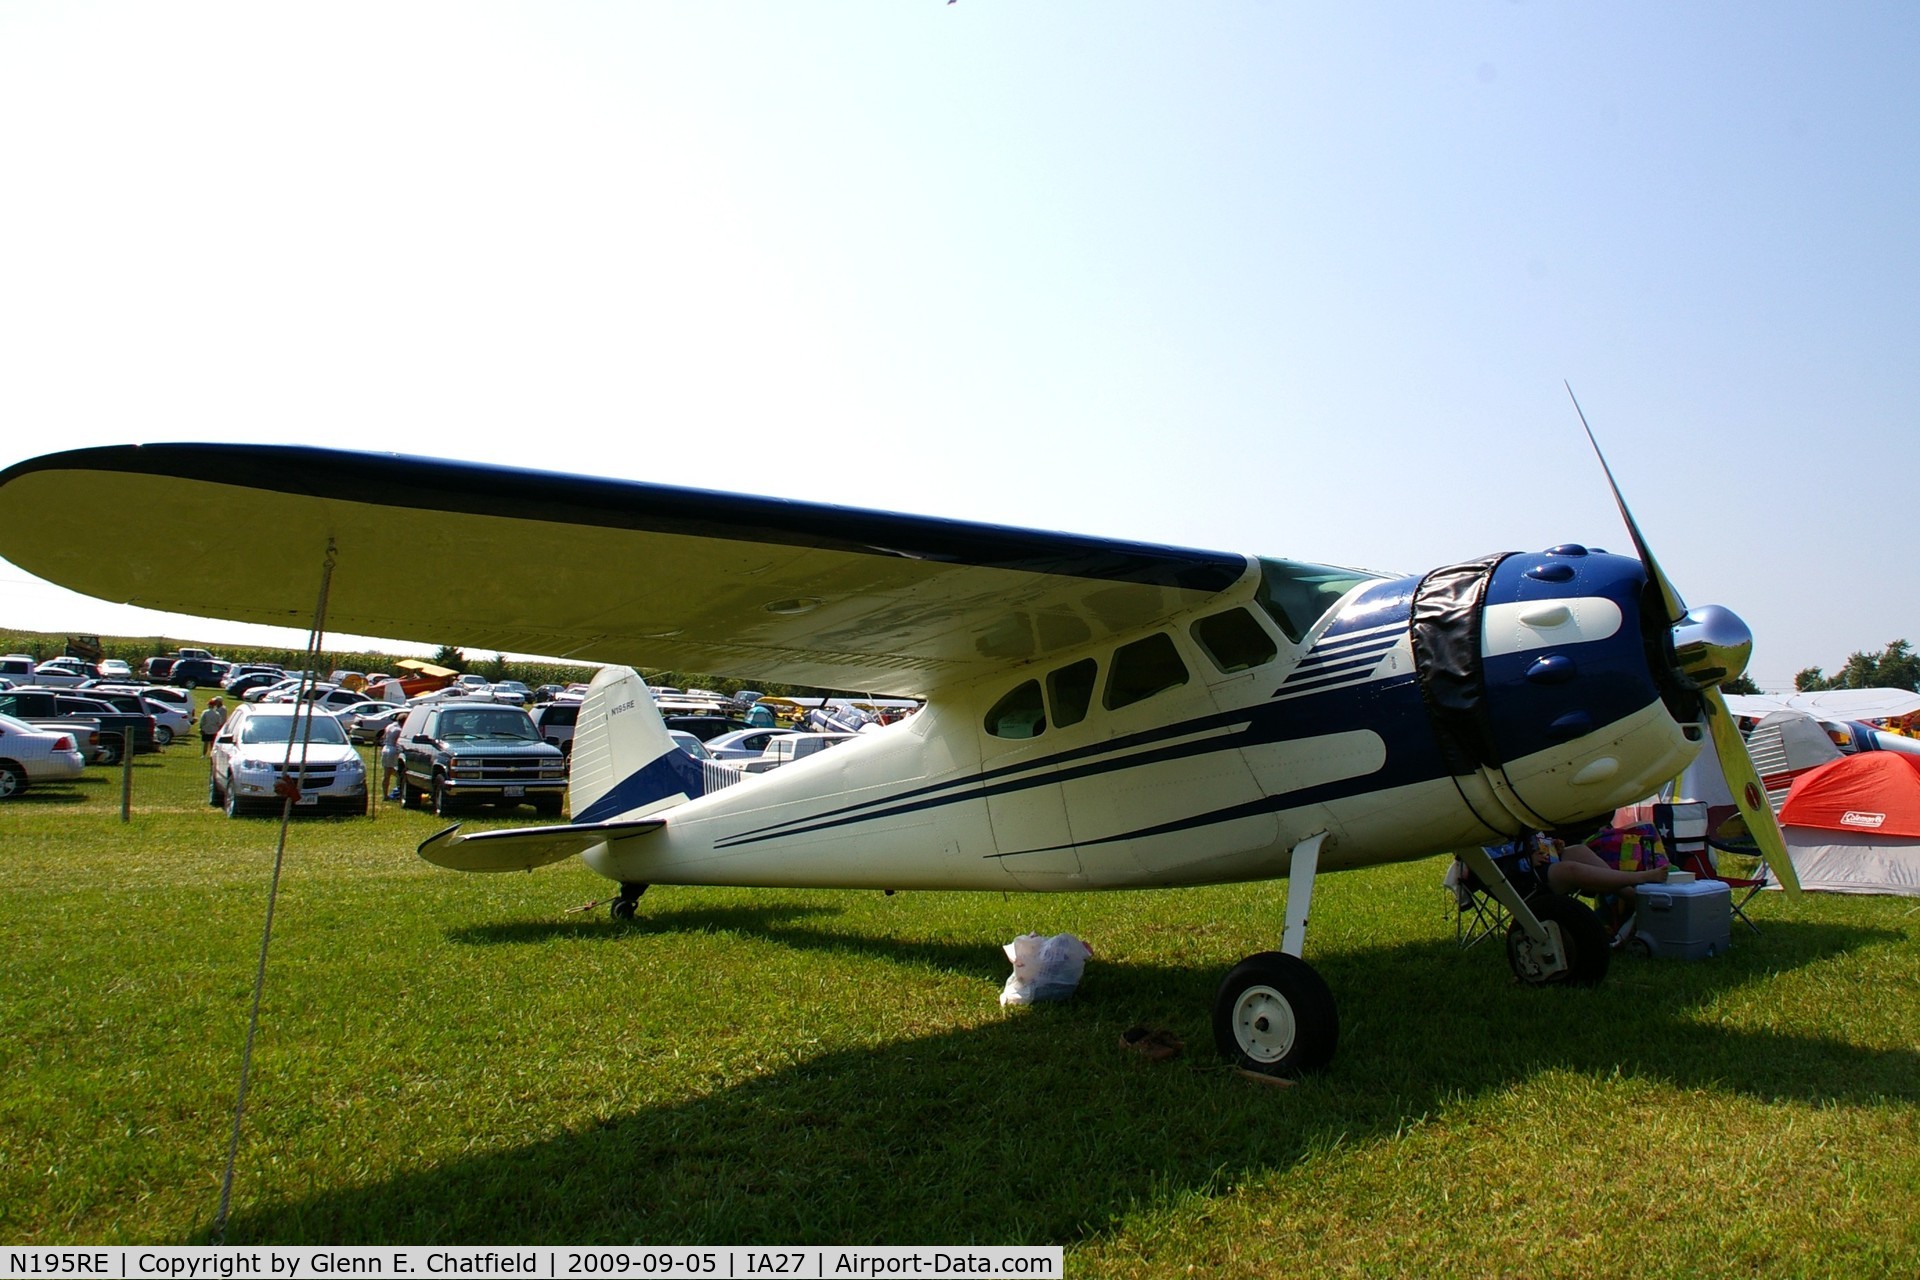 N195RE, 1952 Cessna 195B Businessliner C/N 7934, At the Antique Airplane Association Fly In